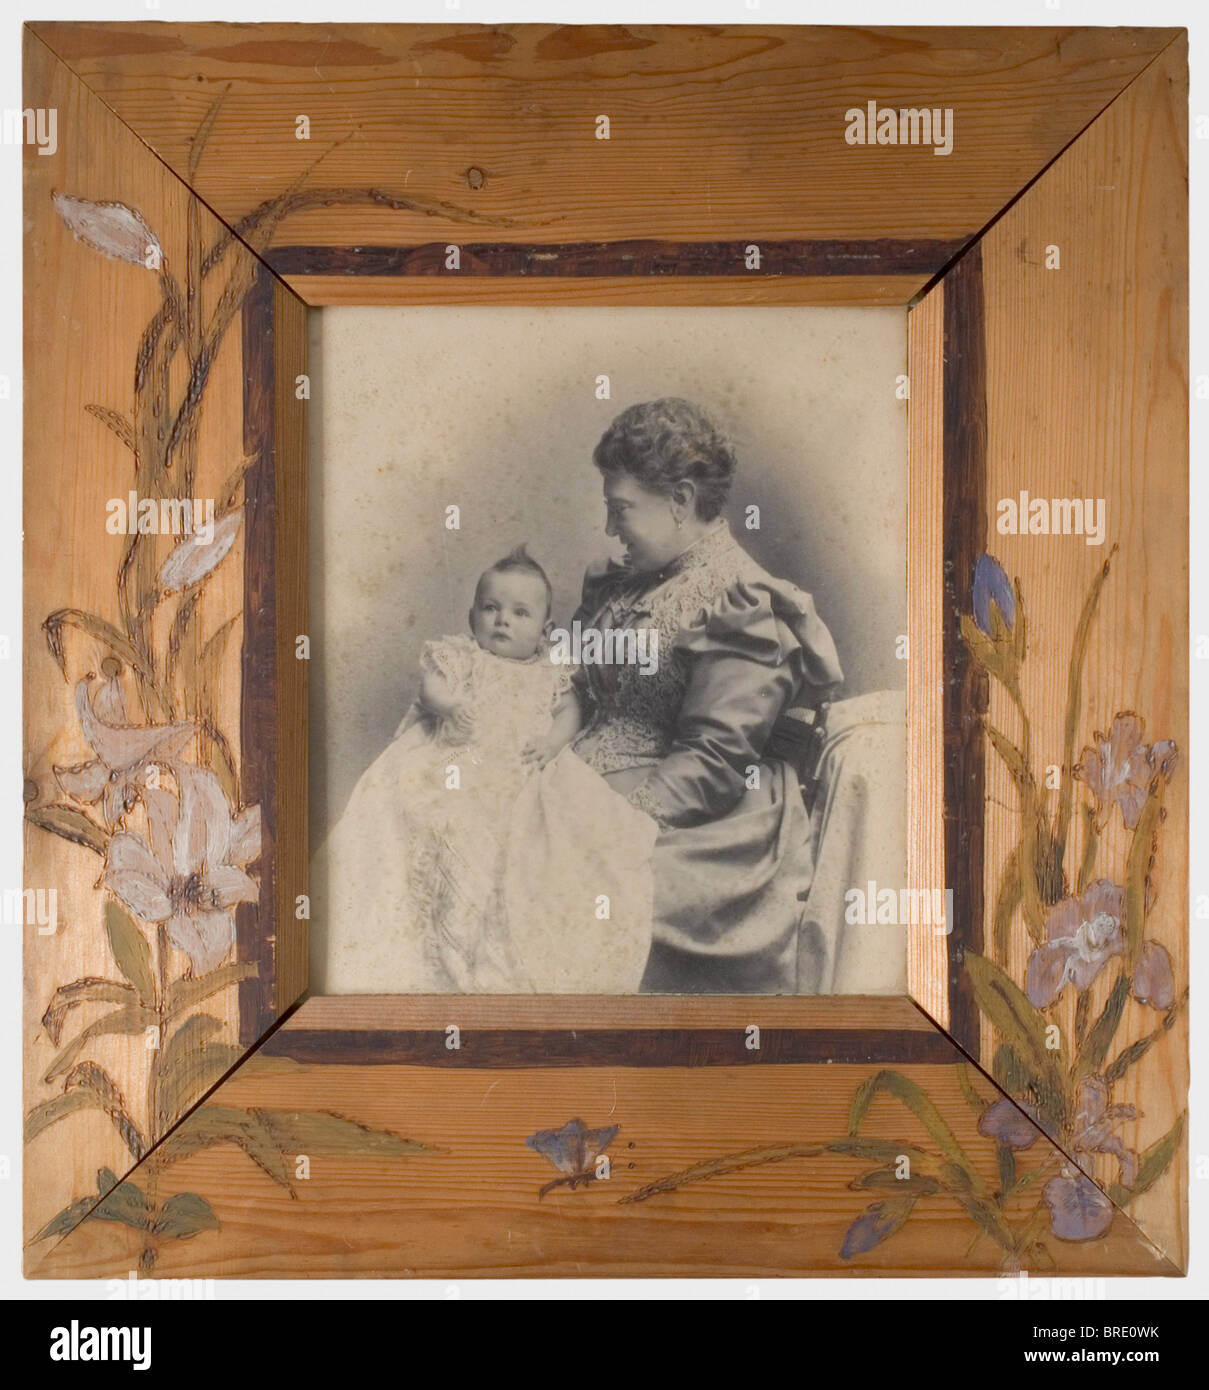 A studio photograph, with her daughter Elsa or Olga 1876/77 Large format photograph, presumably at a baptism. Dimensions 28 x 24.5 cm. The wooden frame with painted floral designs was presumably made by Vera herself. The damaged backing has the inventory label, 'H.V.v.W. G.v.R. Privat Eigentum No. 1357' for the Duchess Vera of Württemberg, Grand Duchess of Russia, and a label for the 'Royal Court Art Dealer Louis Rath Stuttgart'. Dimensions 52 x 48 cm. Provenance: Grand Duchess Vera Konstantinovna Romanova (1854 - 1912). historic, historical, people, 19th centu, Stock Photo